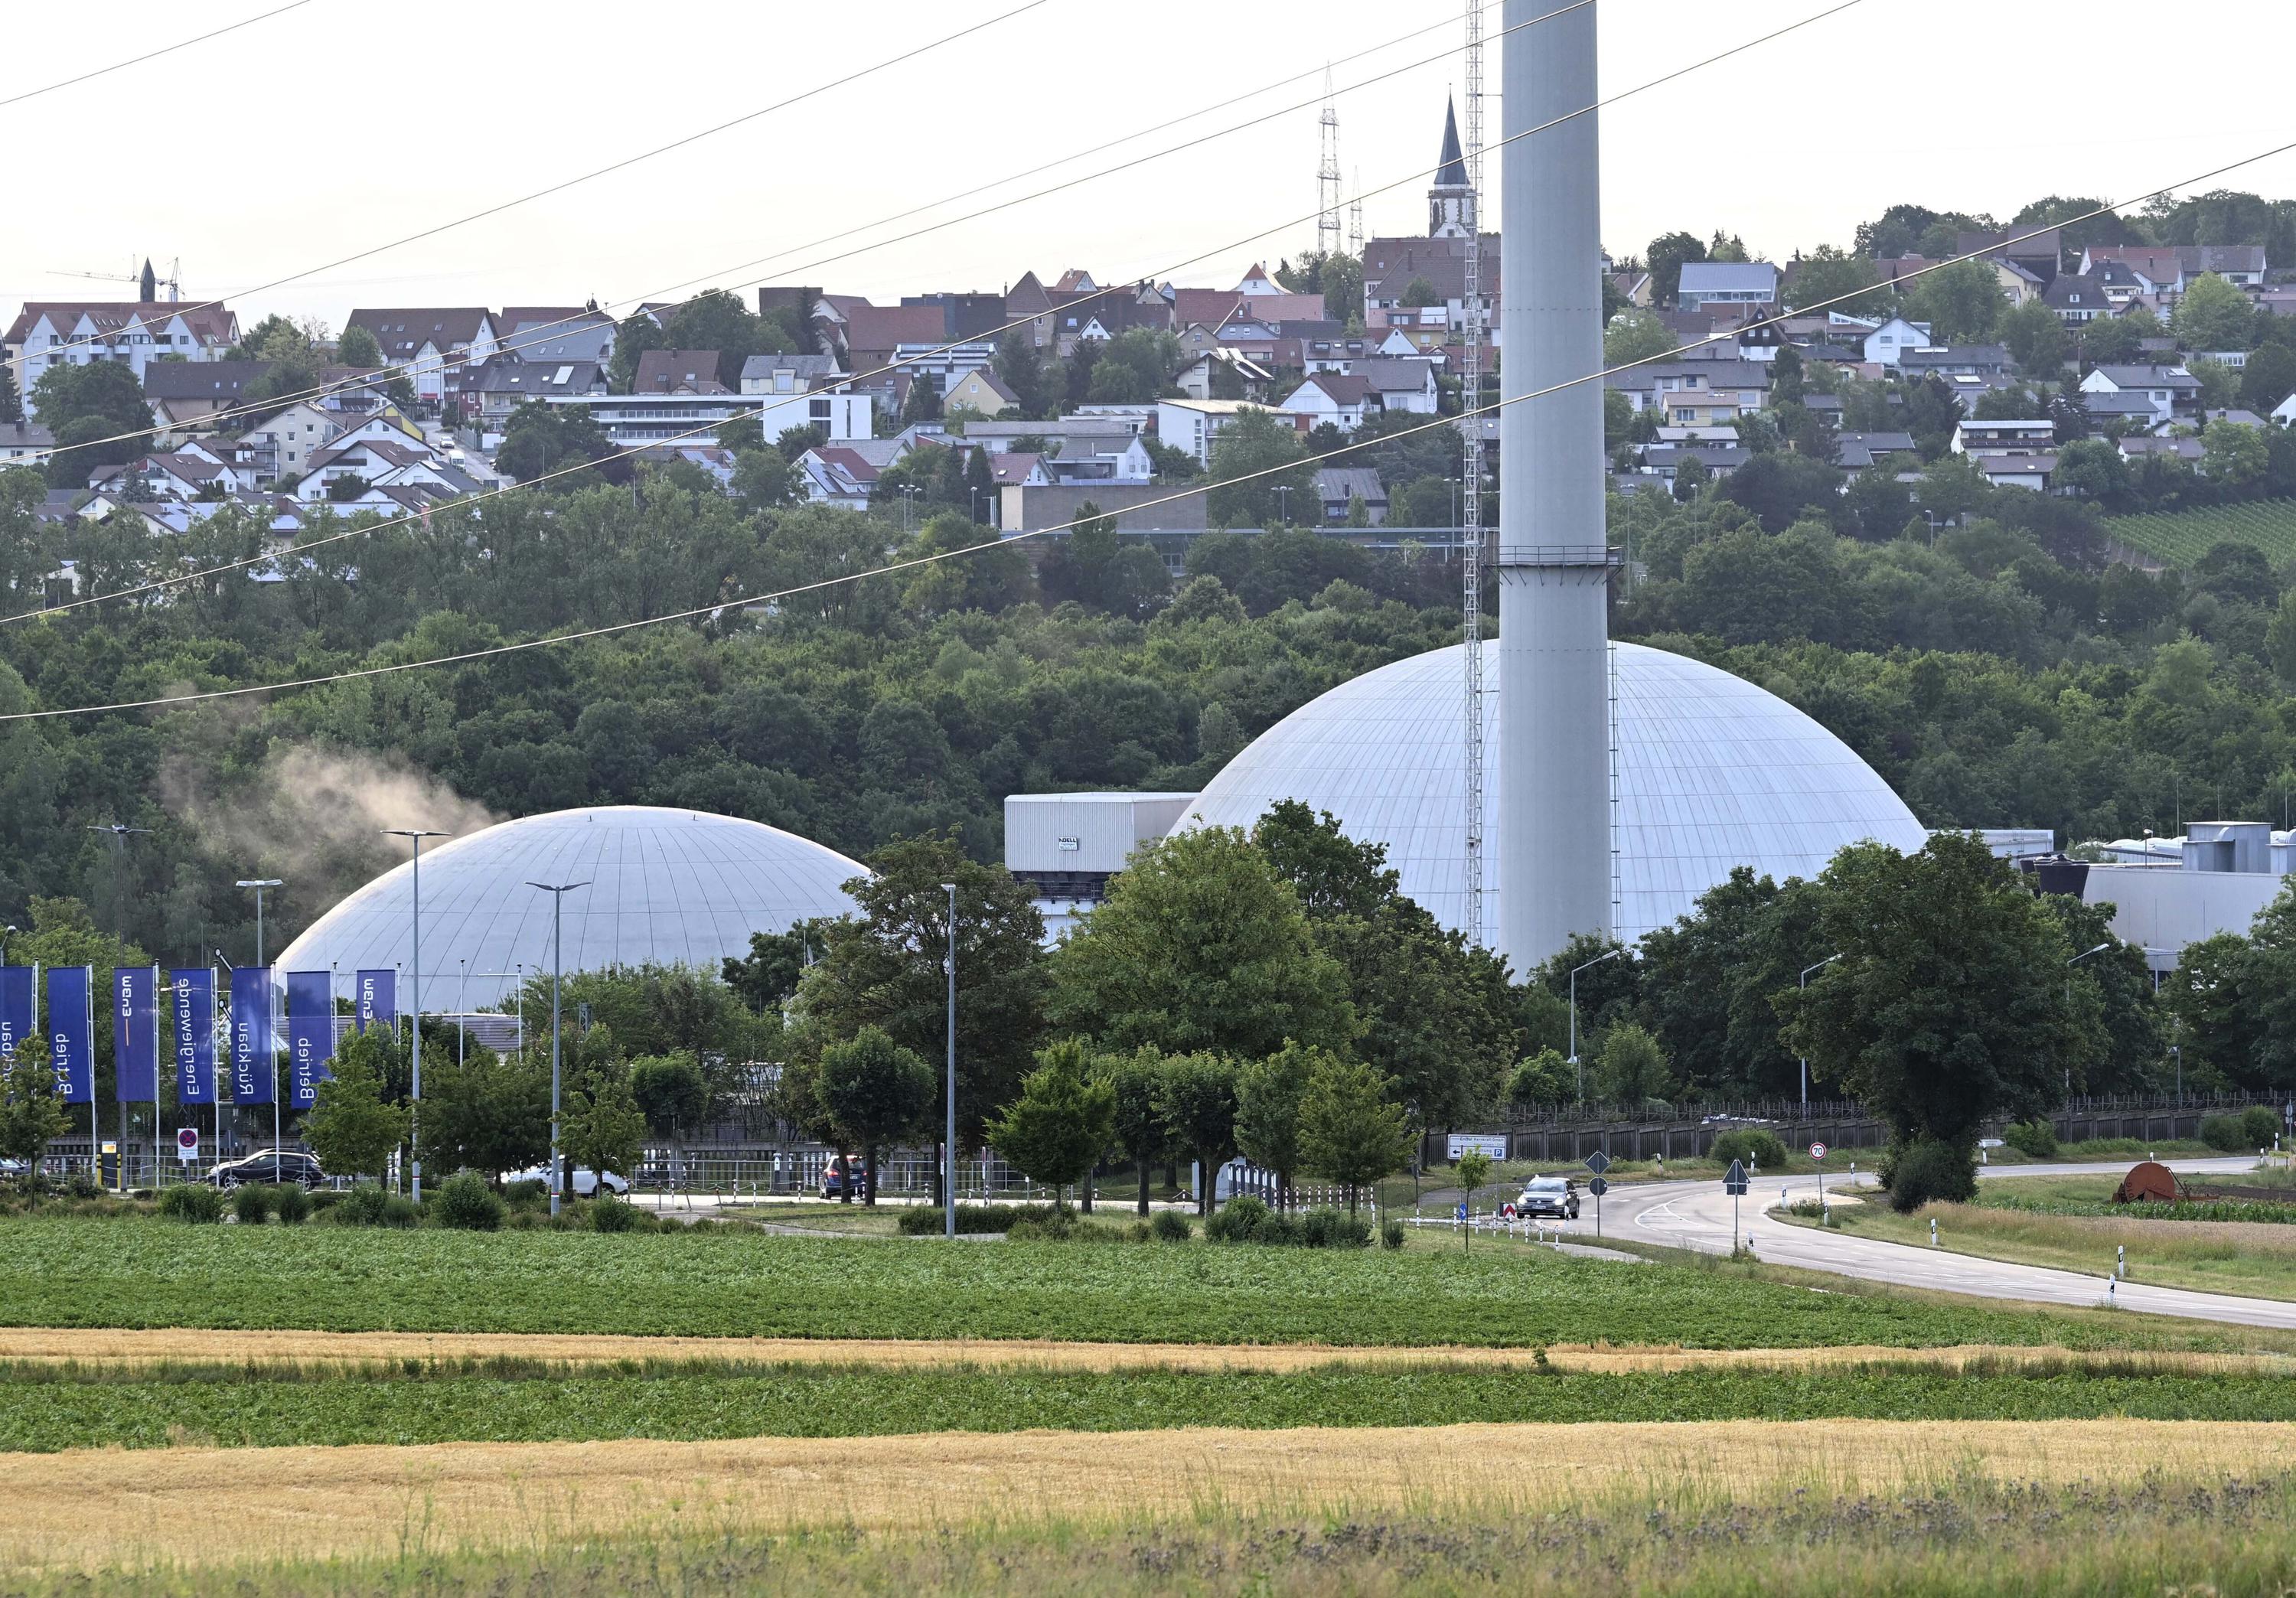 German official: Nuclear would do little to solve gas issue